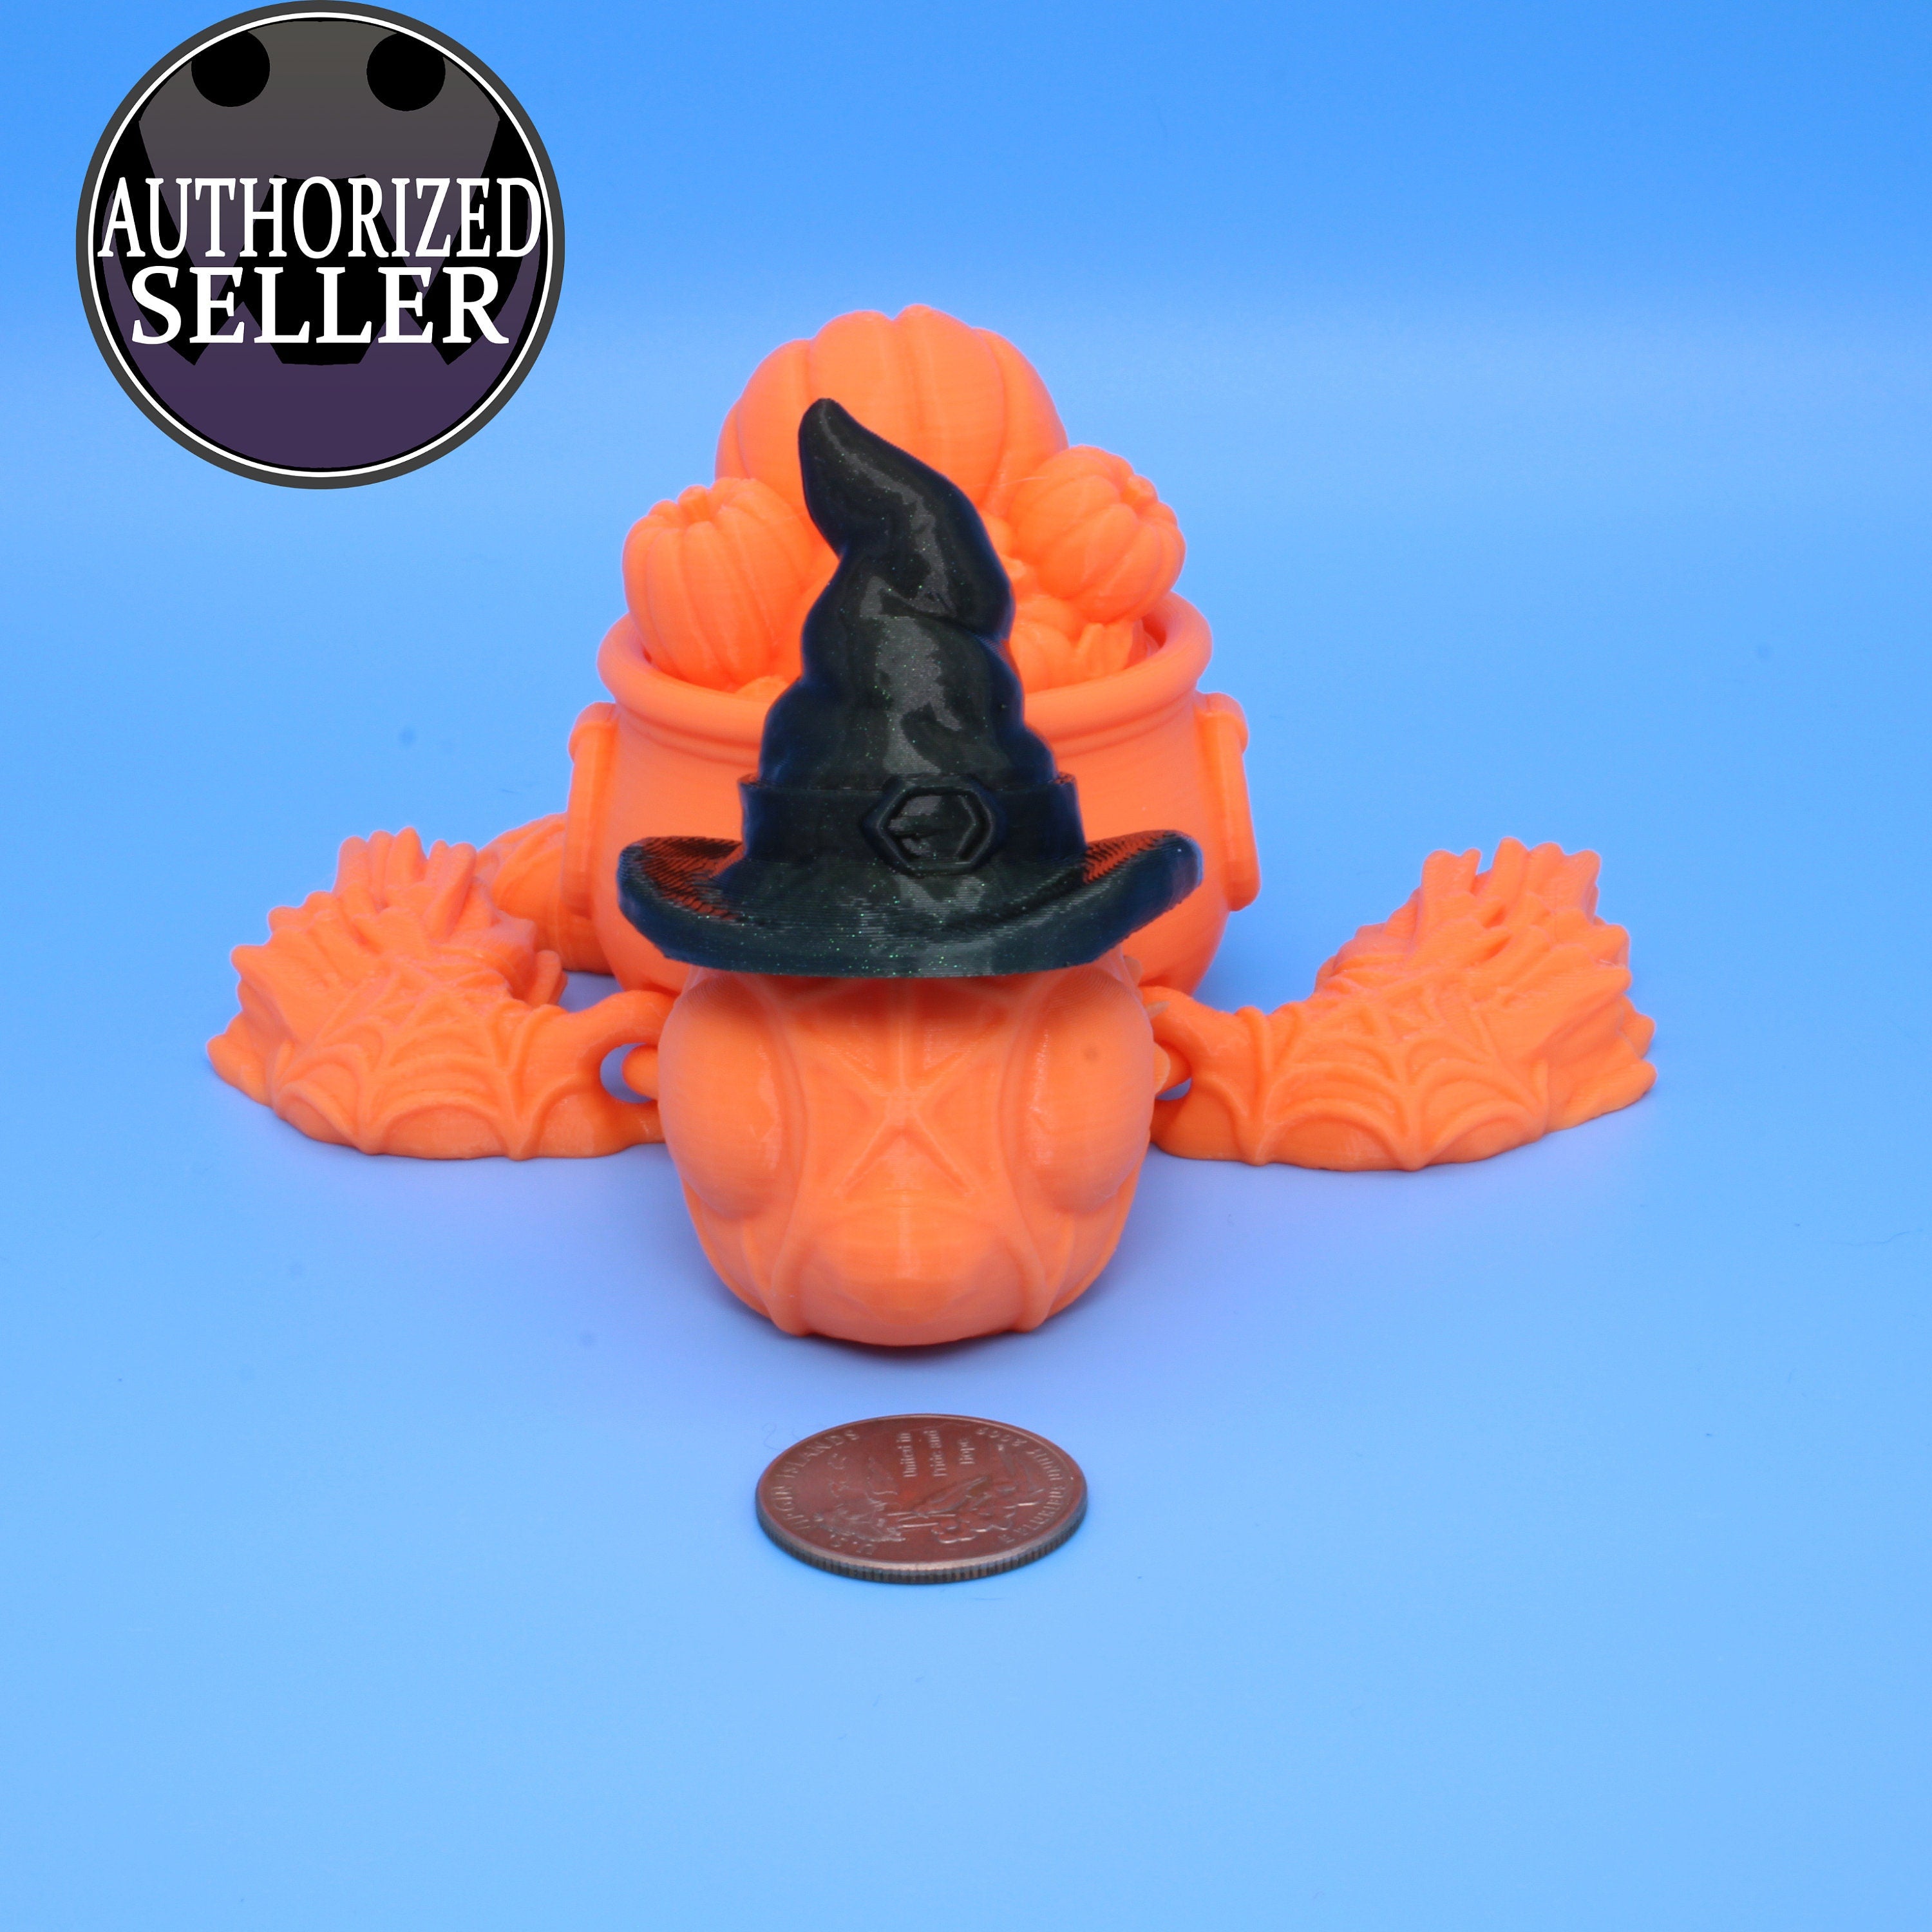 Witchurtle! Spooky time! Witch turtle mix. Mini Halloween candy / treat dish. Adoptable turtle buddy.